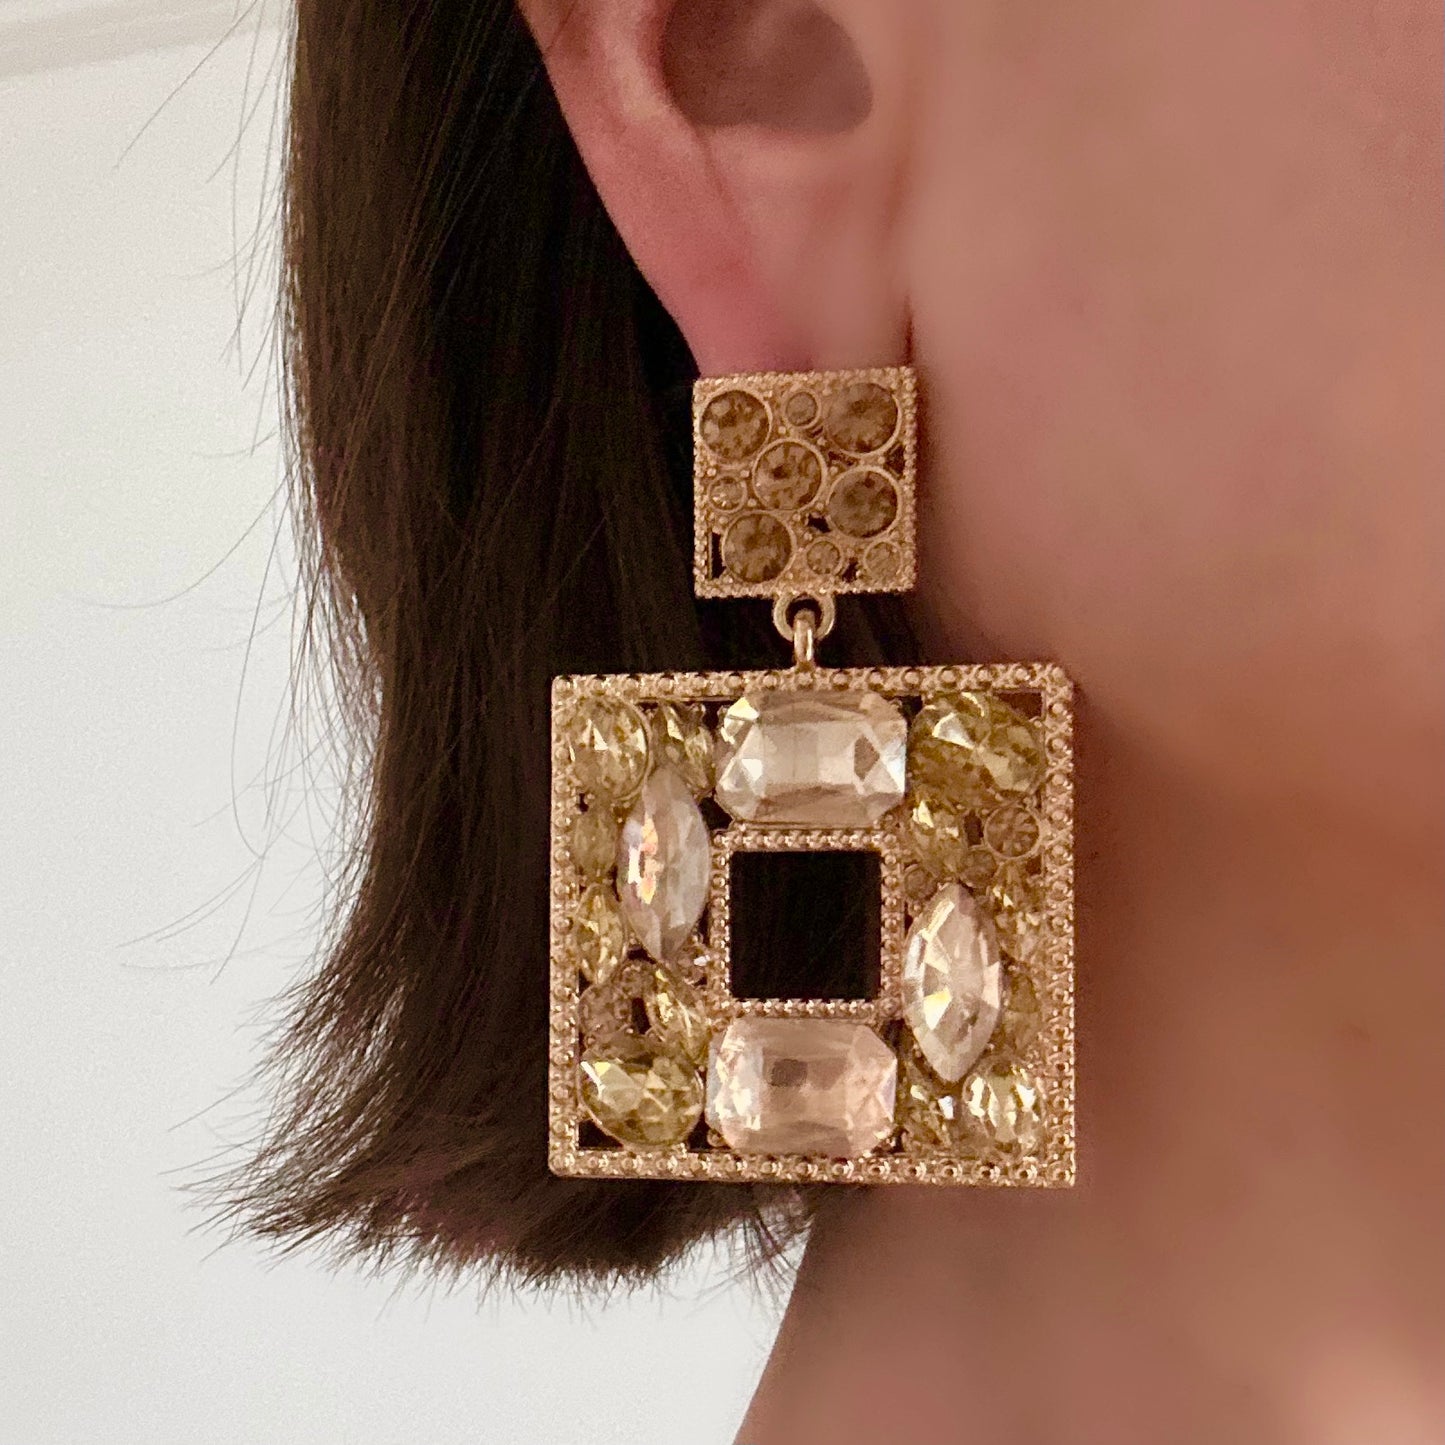 CHAMPAGNE LUCITE AND GOLD SQUARE EARRING